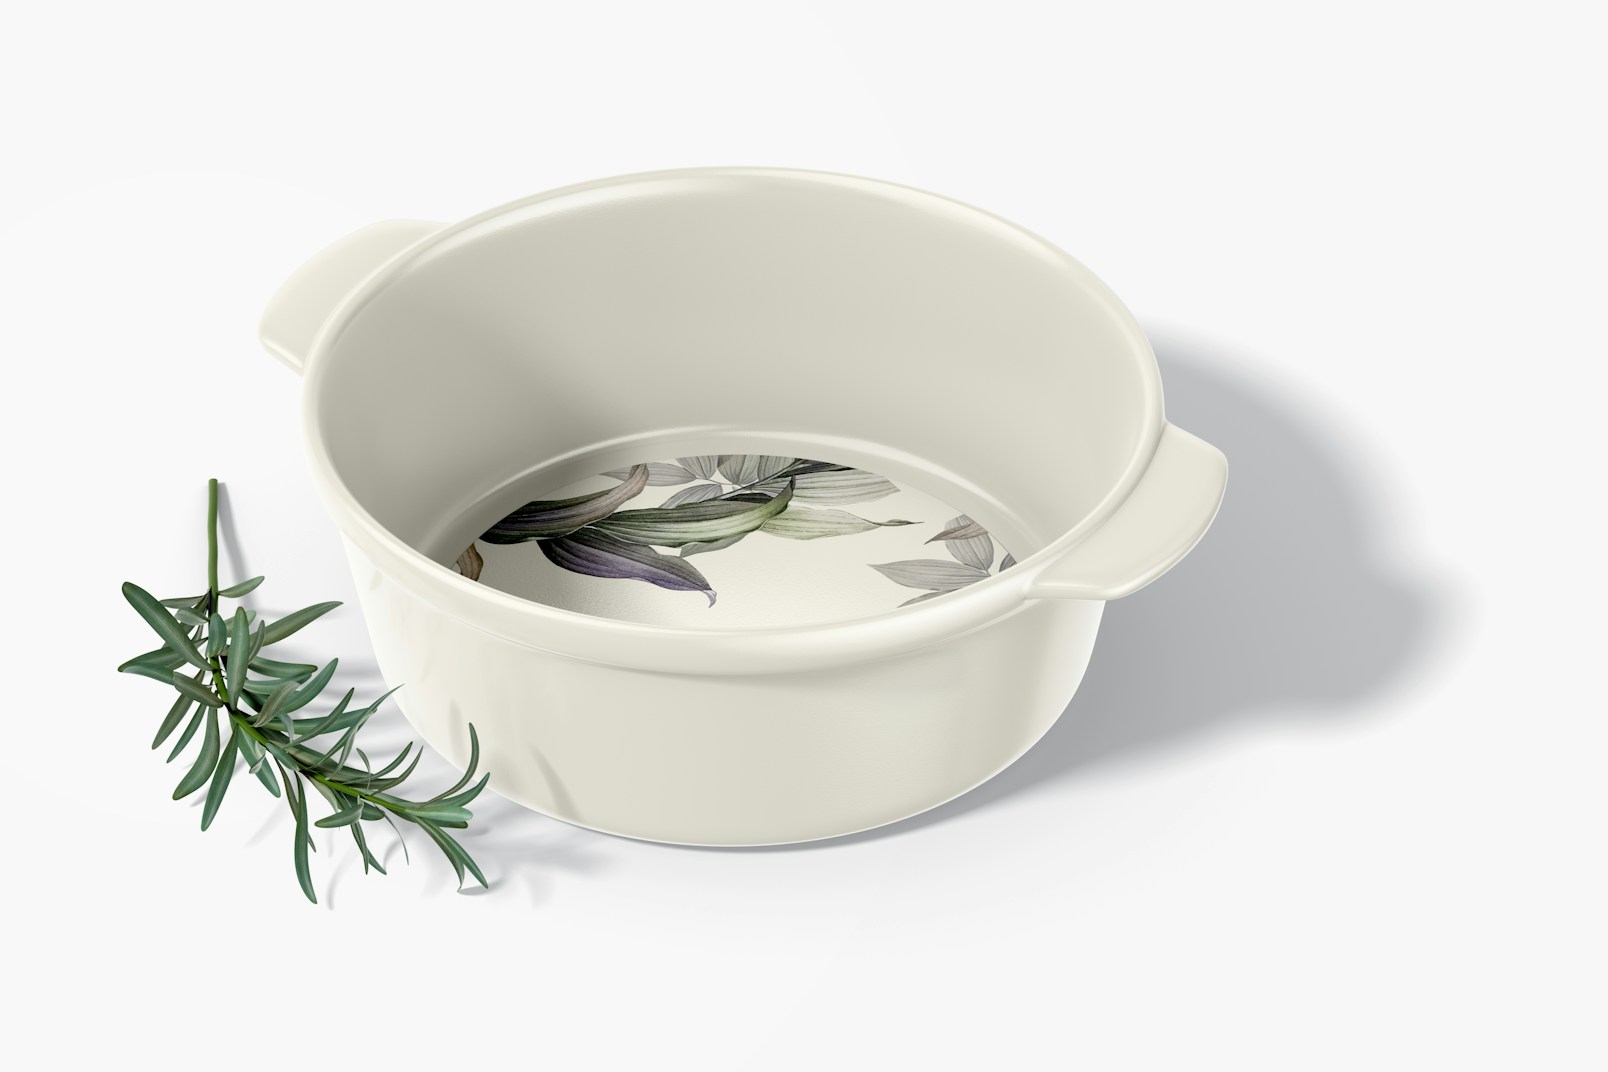 Round Ceramic Dish with Handles Mockup, Perspective View